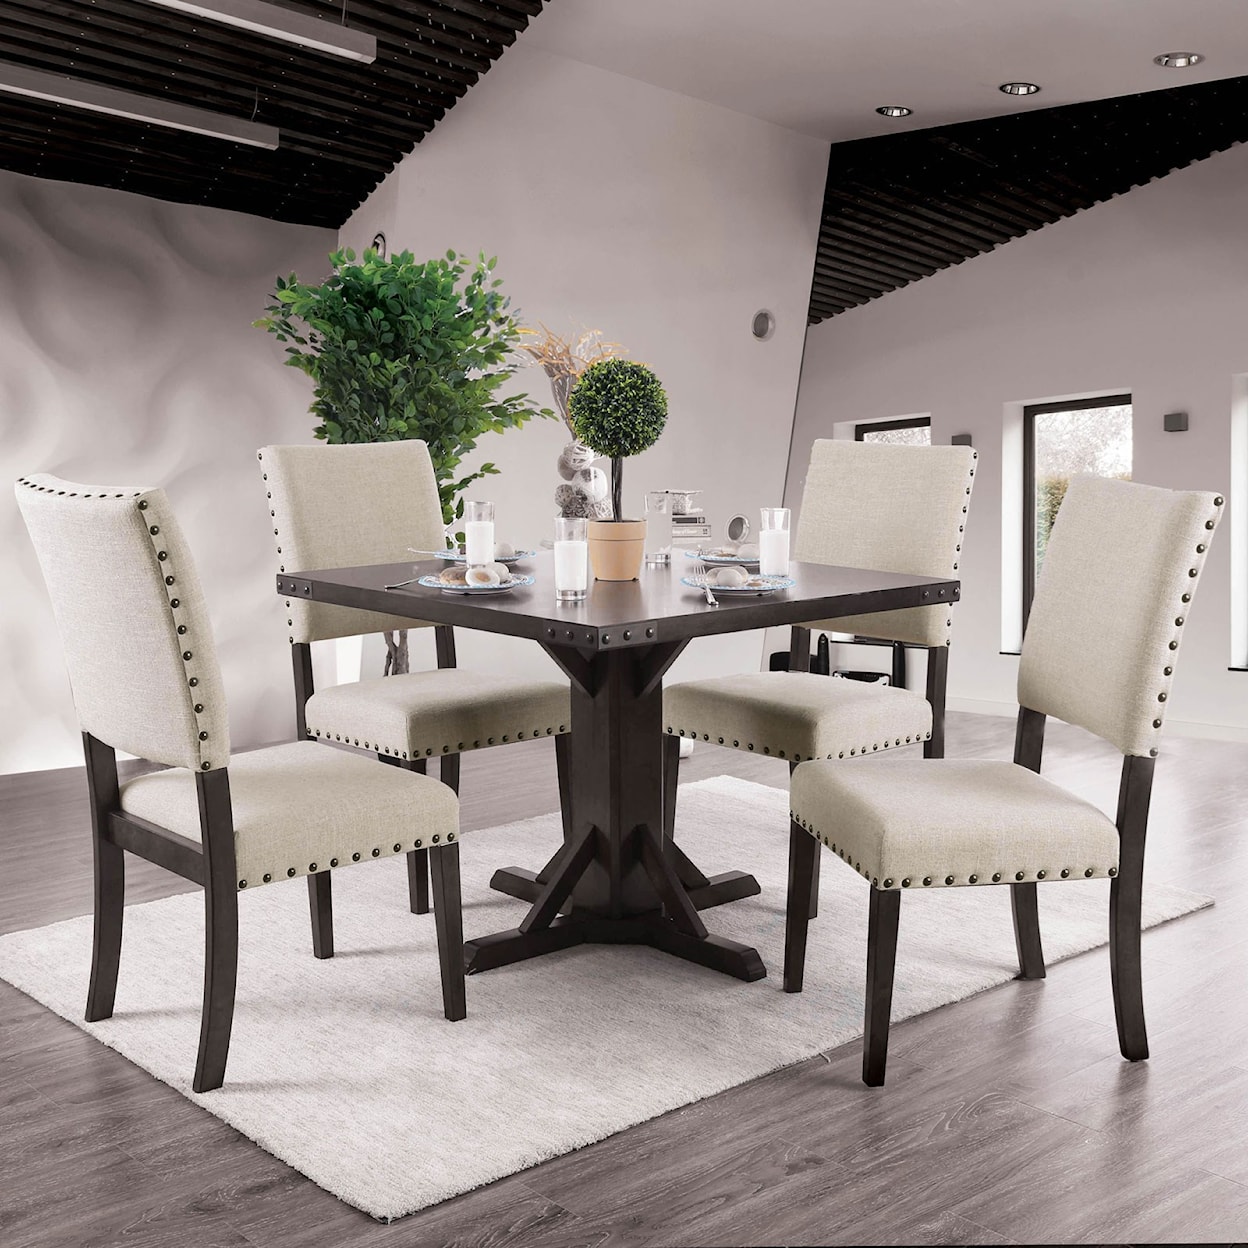 FUSA Glenbrook Table + 4 Chairs